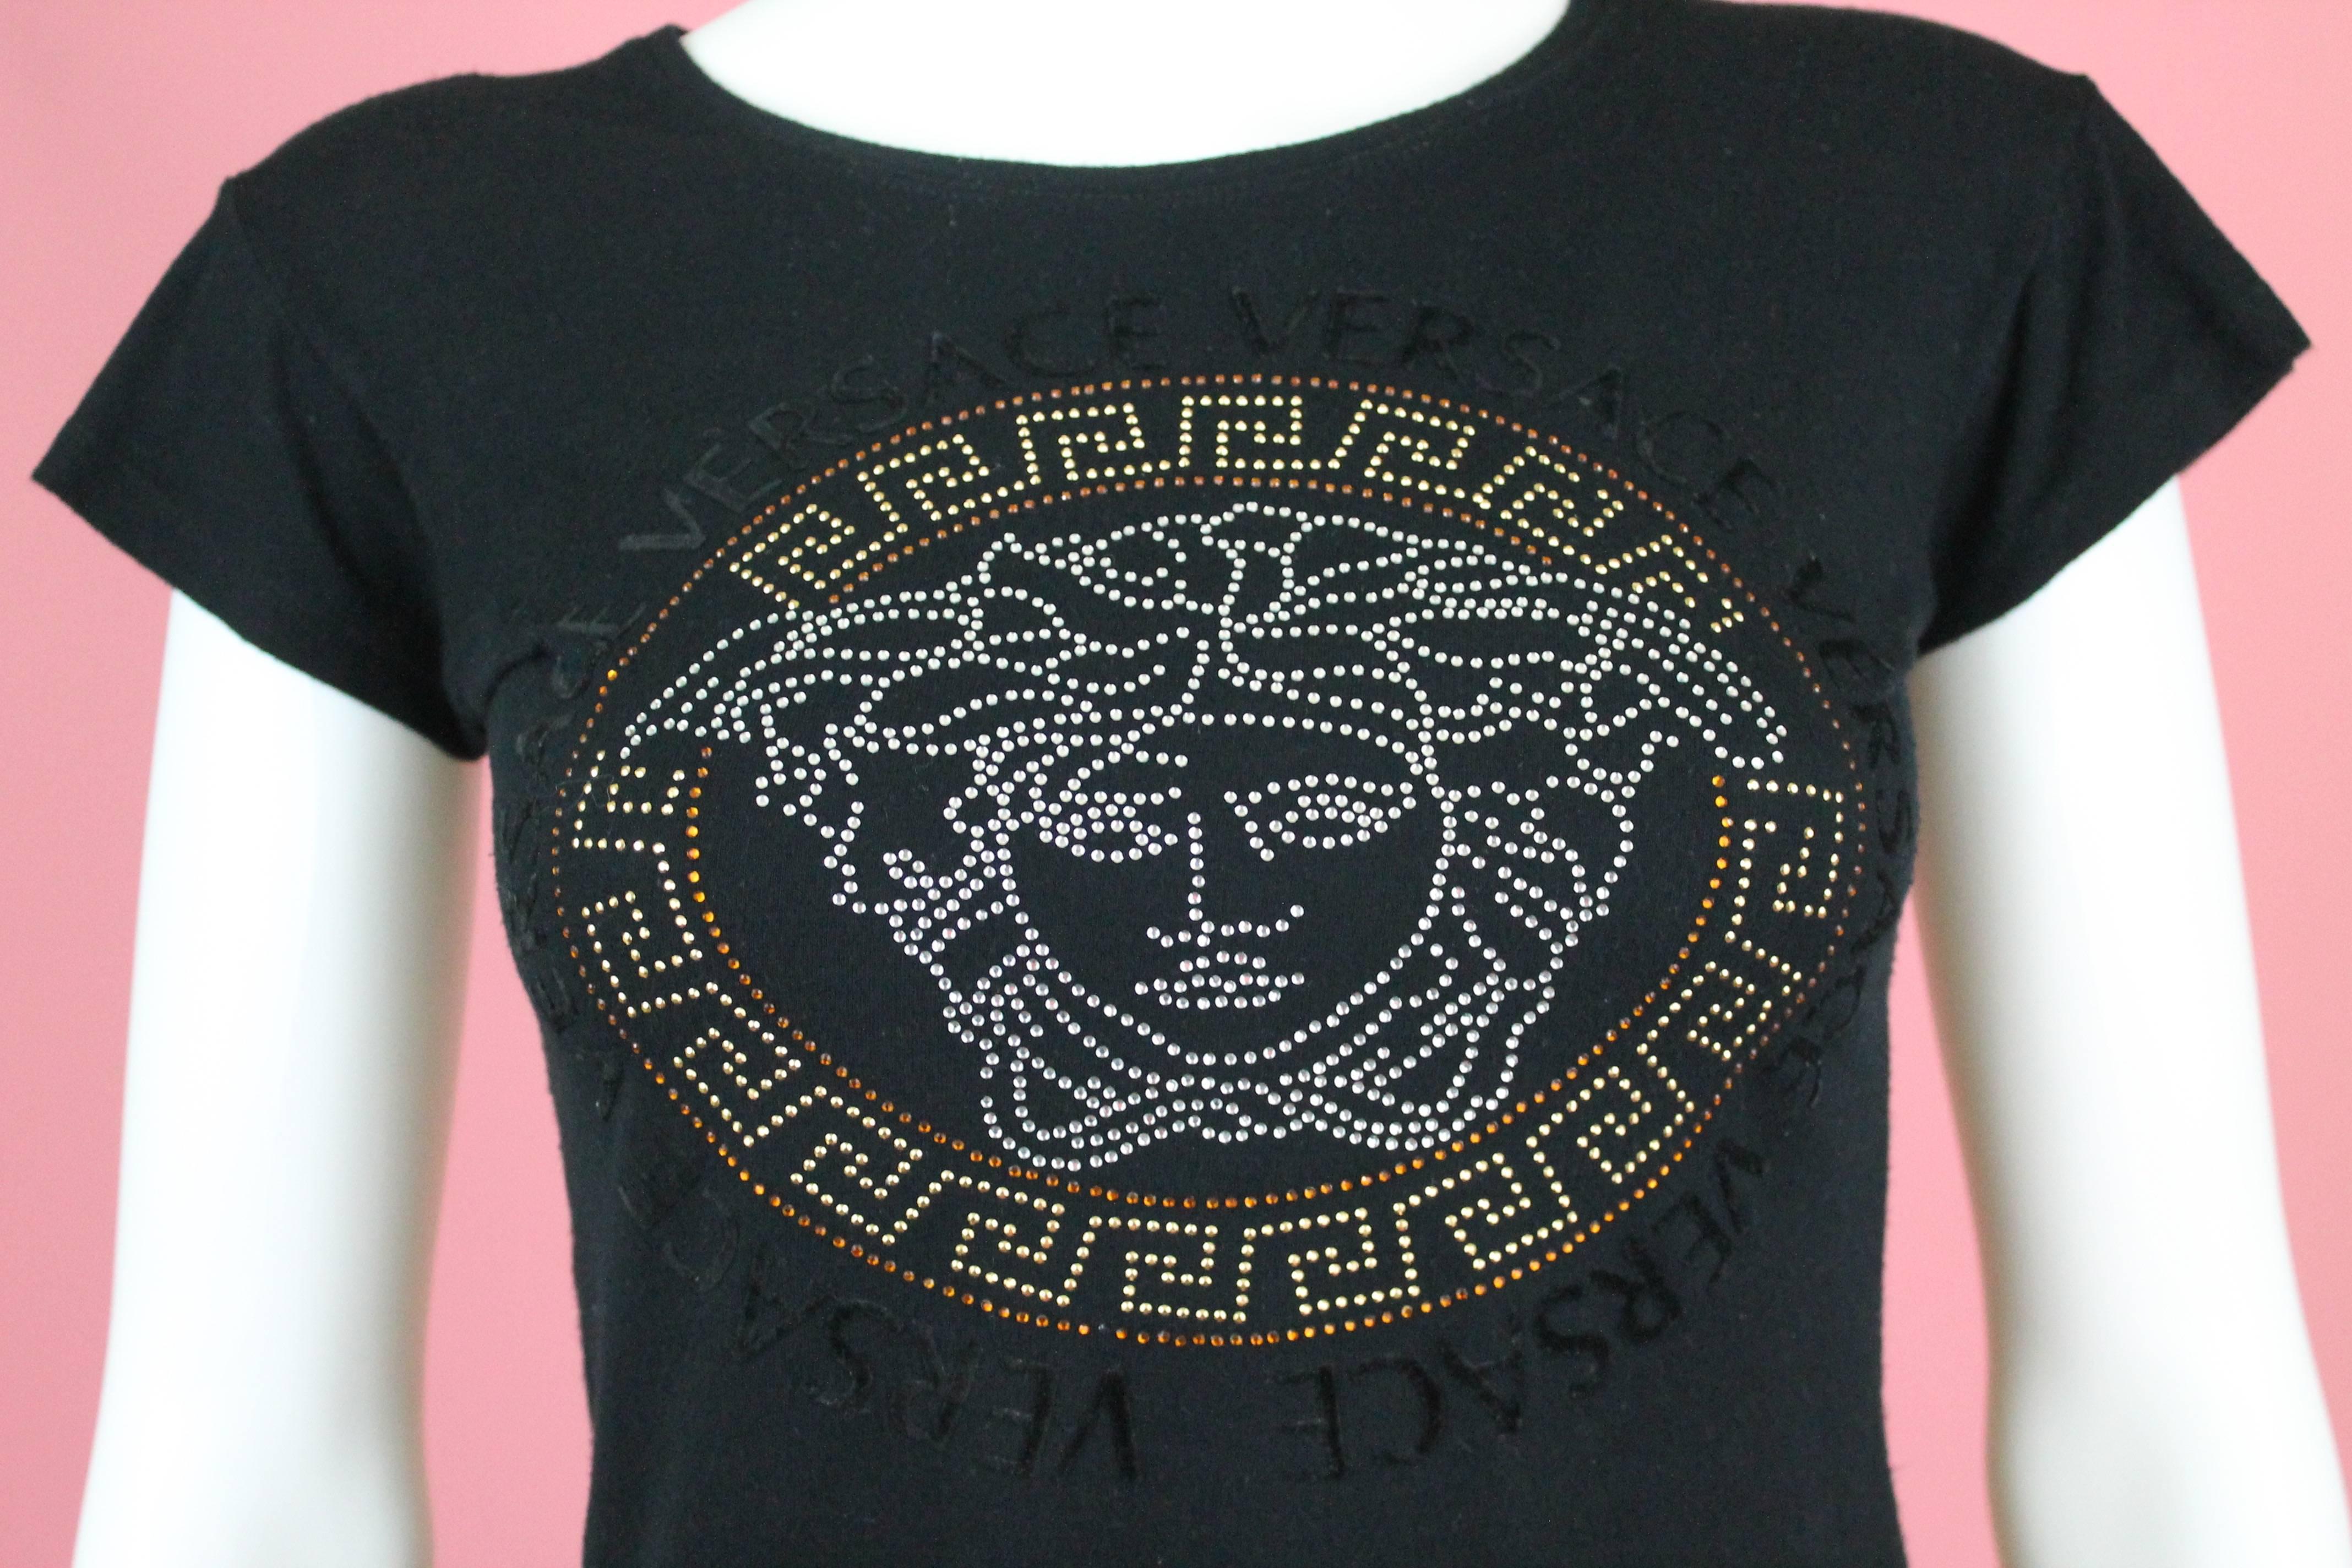 -Stretchy and light Summer shirt from Versace 
-Features iconic Medusa logo in multicolor crystals with Greek key design outline. 
-Has Versace font logo in flocked velvet
-Shirt has care tag cut off, however, 100% authentic
-Sized M
-Made in